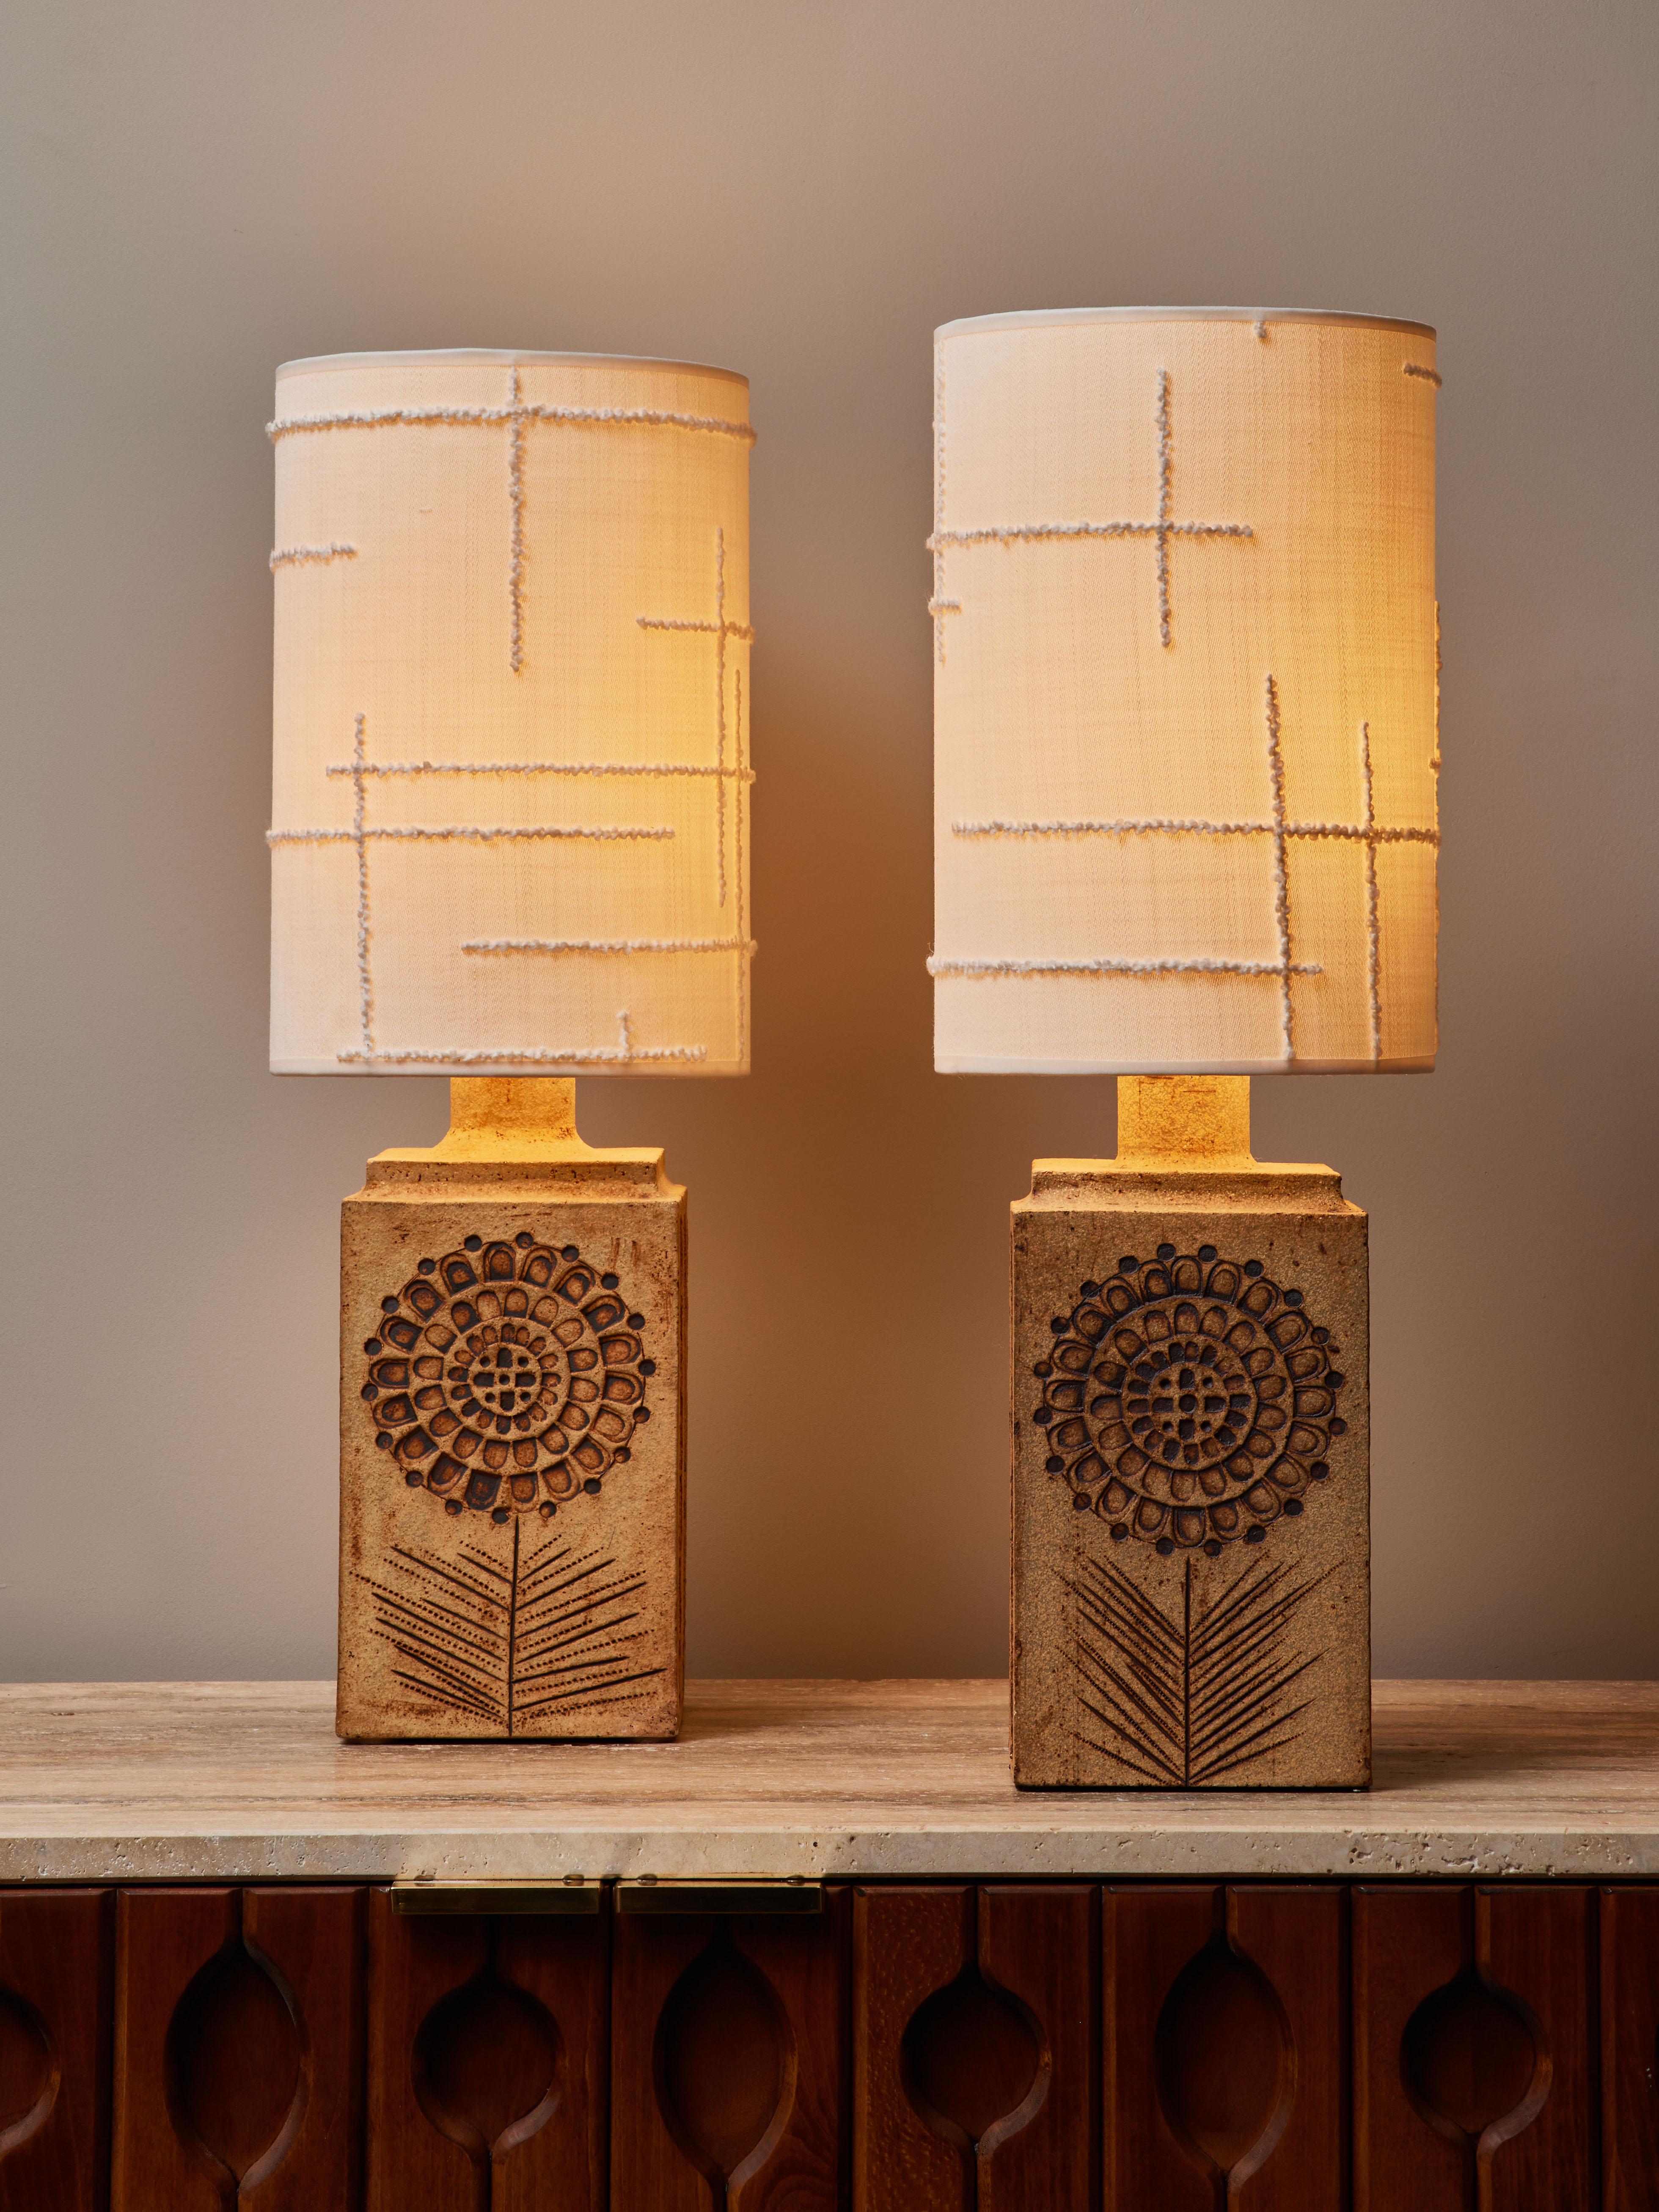 Pair of stunning table lamps made by Roger Capron, made of a square base with flower motifs on two opposing sides and stripes decors on the two others. Artist’s stamp on the bottom back of the lamps “Capron Valloris France”.
Topped with new